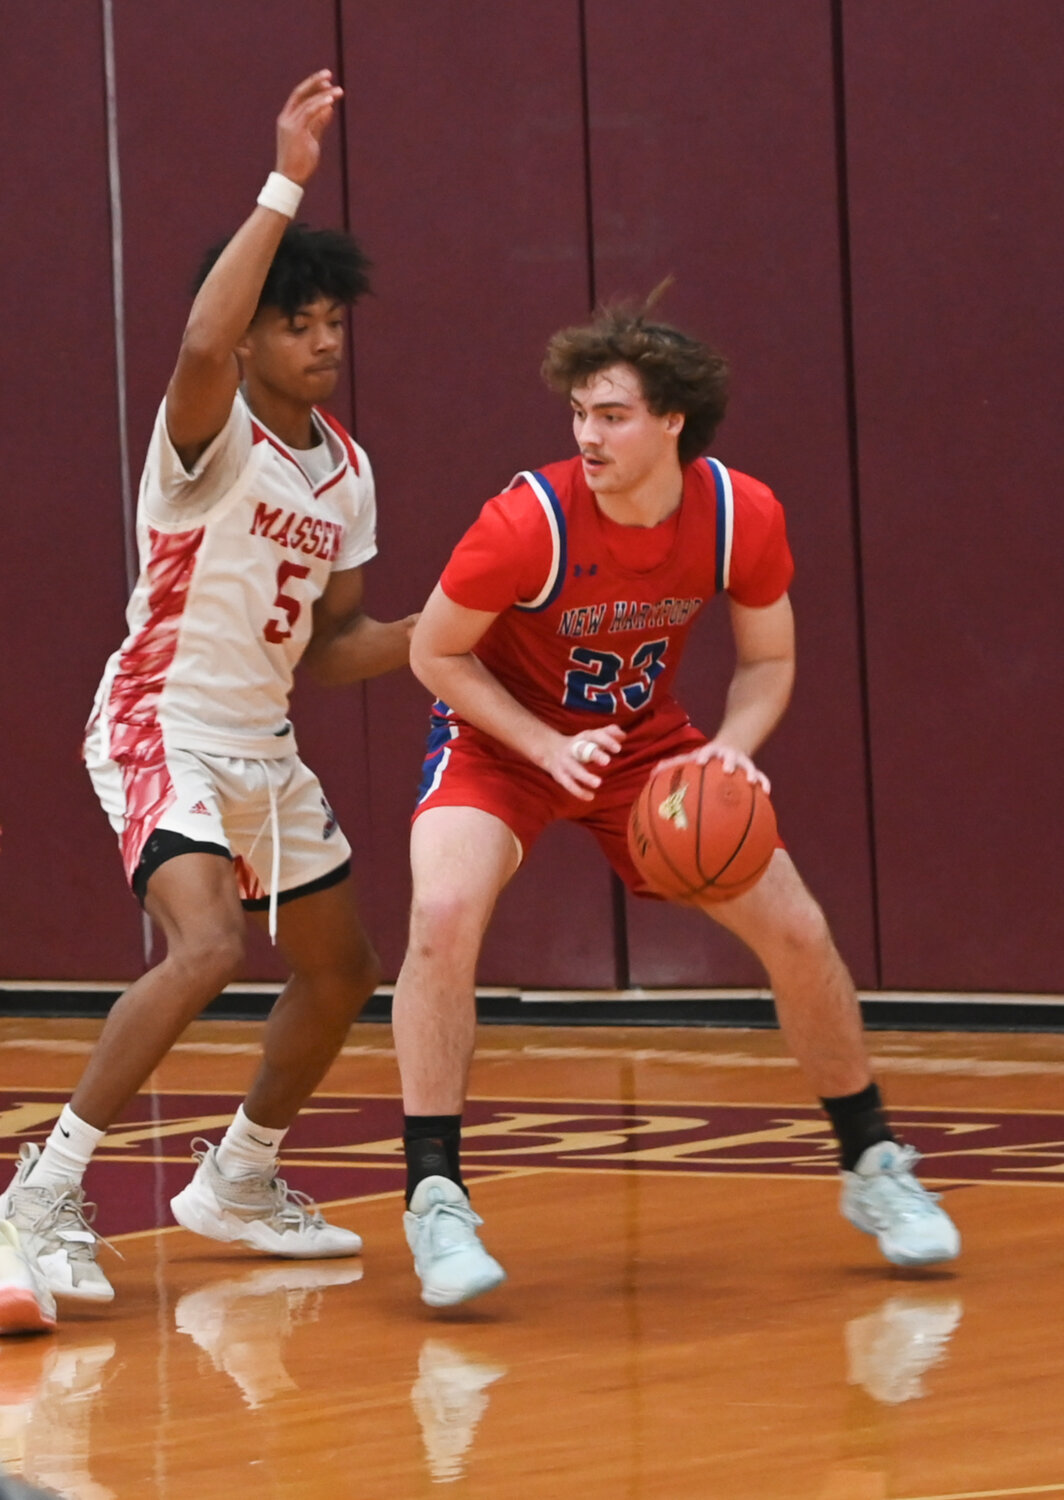 New Hartford's Zack Philipkoski looks for space near the basket on Saturday in the Class A regional final against Massena on Saturday at SUNY Potsdam. New Hartford led by 30 at halftime and rolled to a 68-35 win.